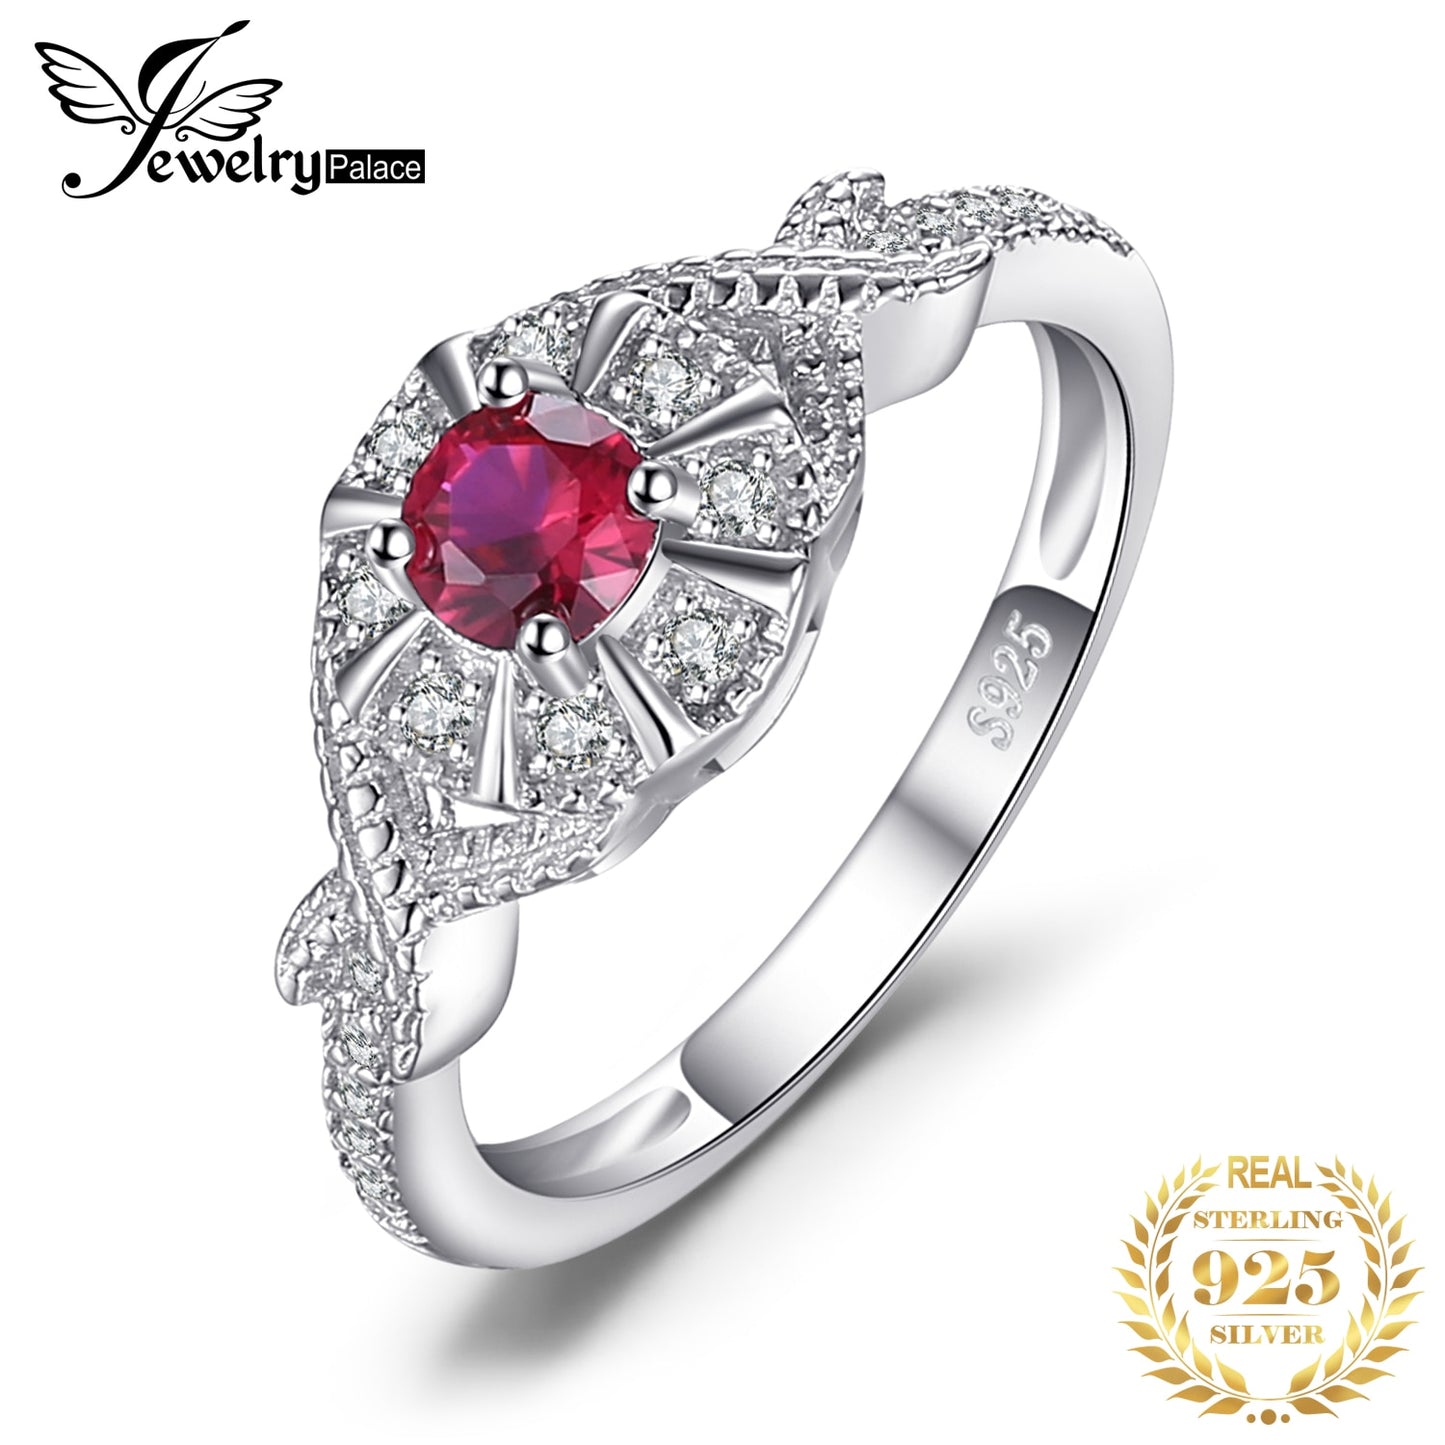 JewelryPalace Infinity Created Ruby 925 Sterling Silver Halo Ring for Women Fashion Statement Gemstone Jewelry Wedding Gift